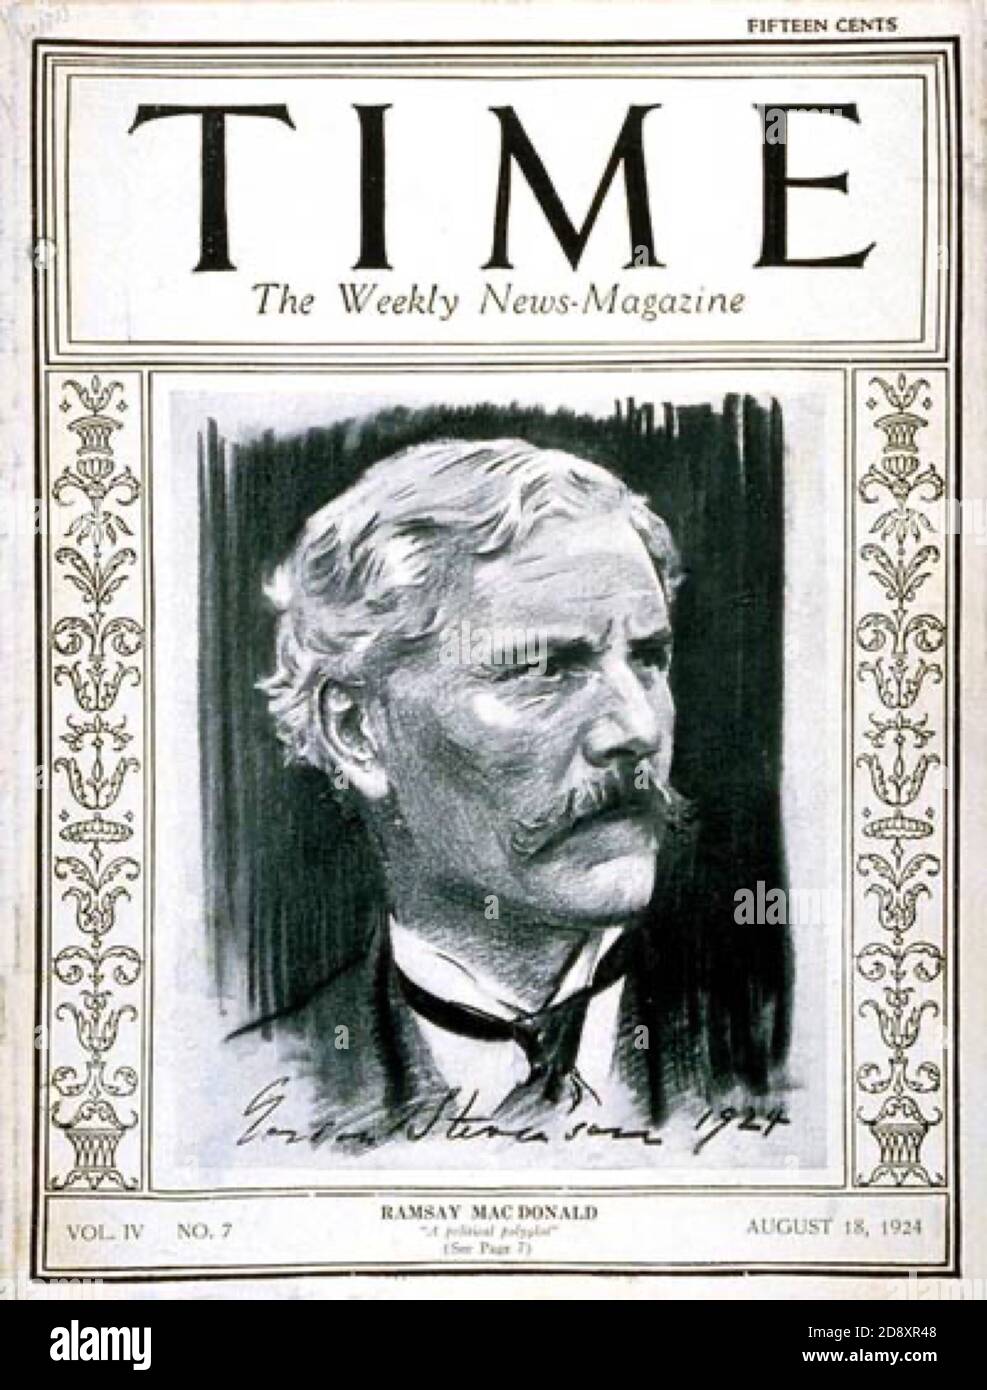 Time magazine front cover - Ramsay MacDonald - 1924 Stock Photo